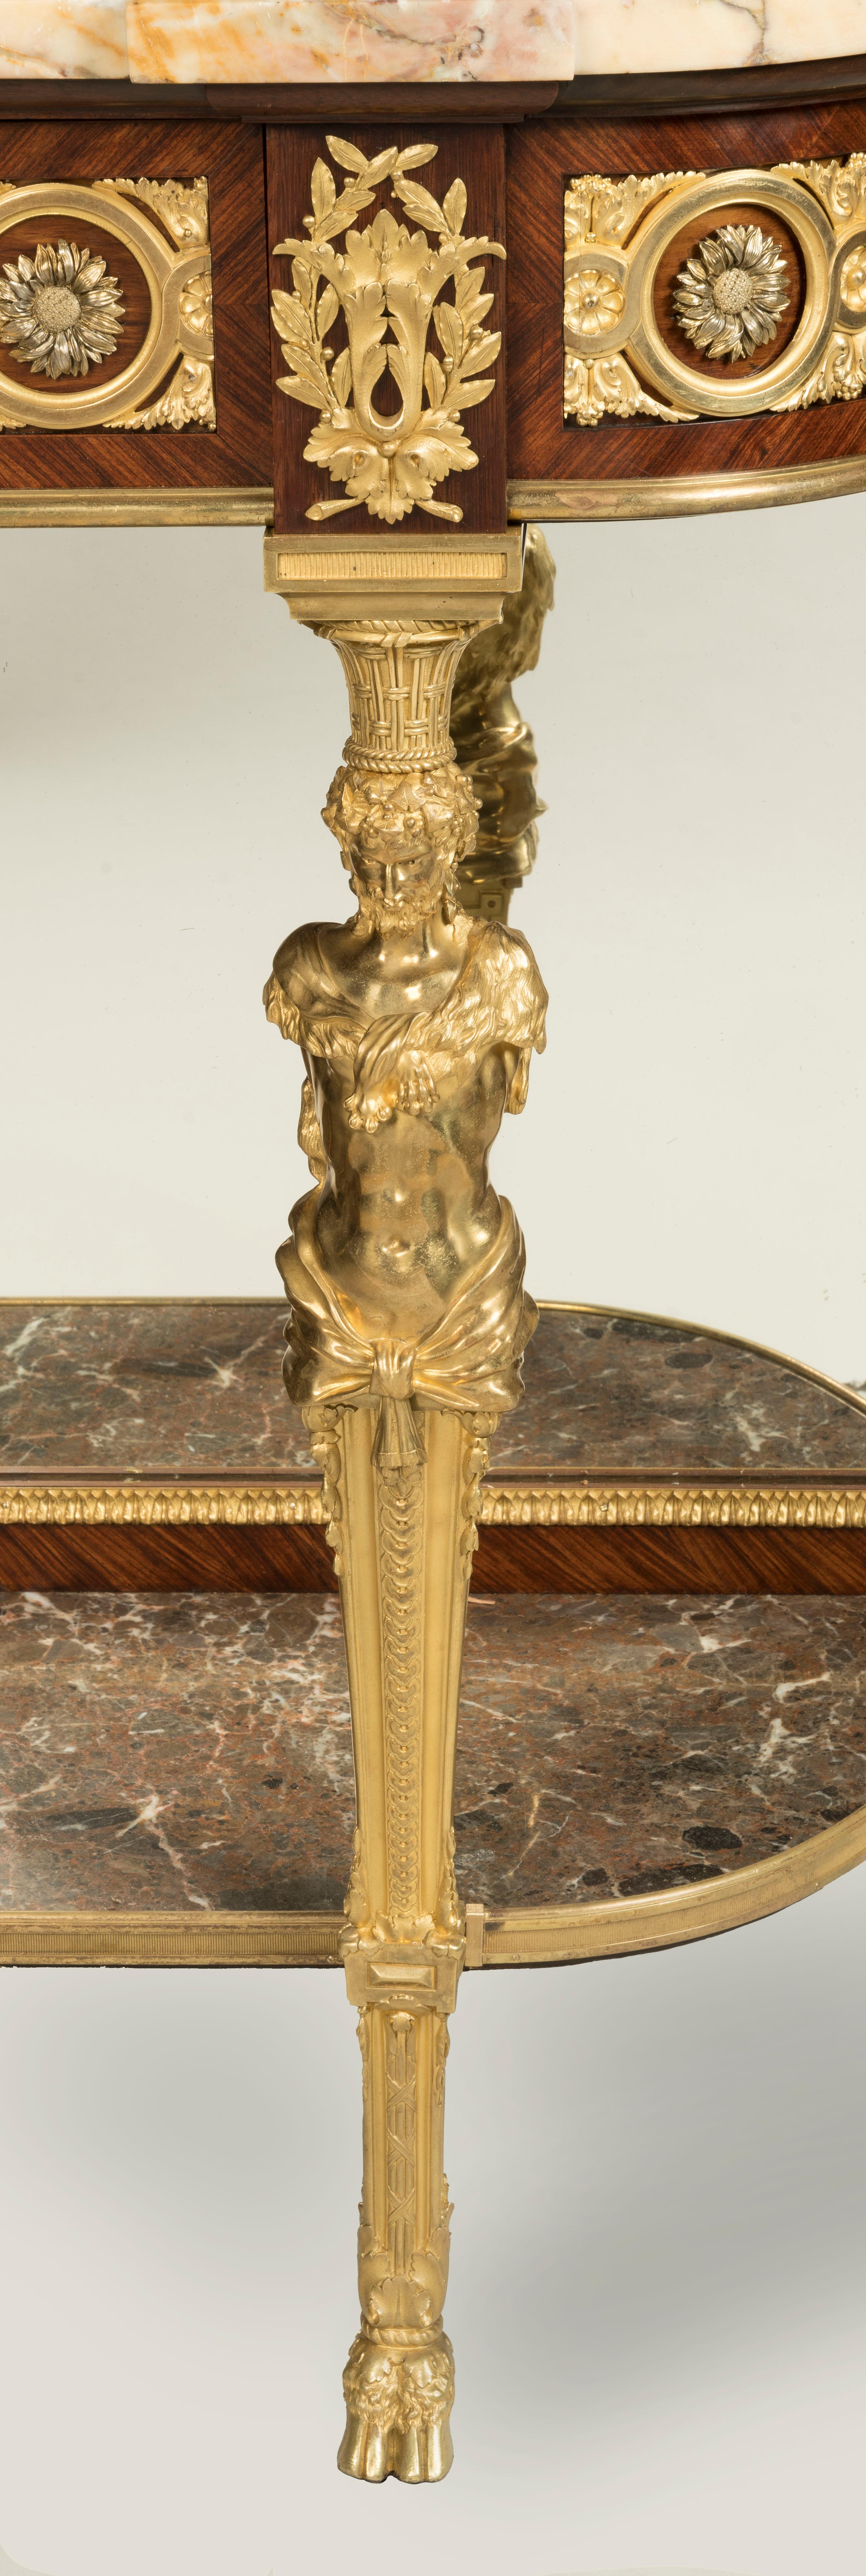 19th Century French Ormolu-Mounted Kingwood Console Table in the Louis XVI Style For Sale 7